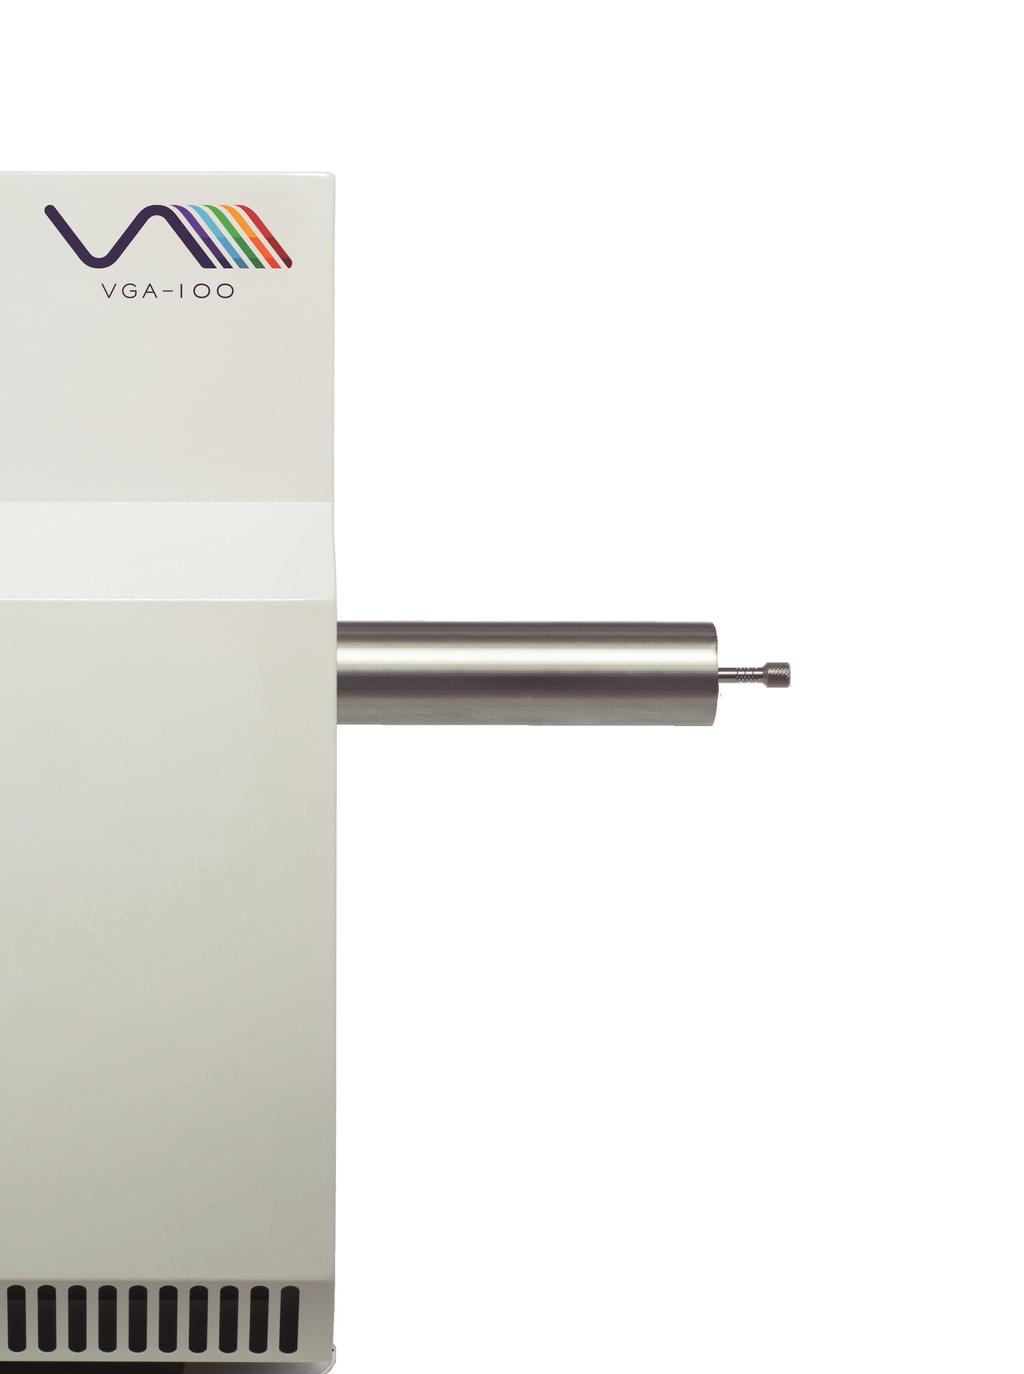 Everything you need in one GC detector Universal and selective detector with sensitive linear response for accurate quantitation Fast detector response First-principal